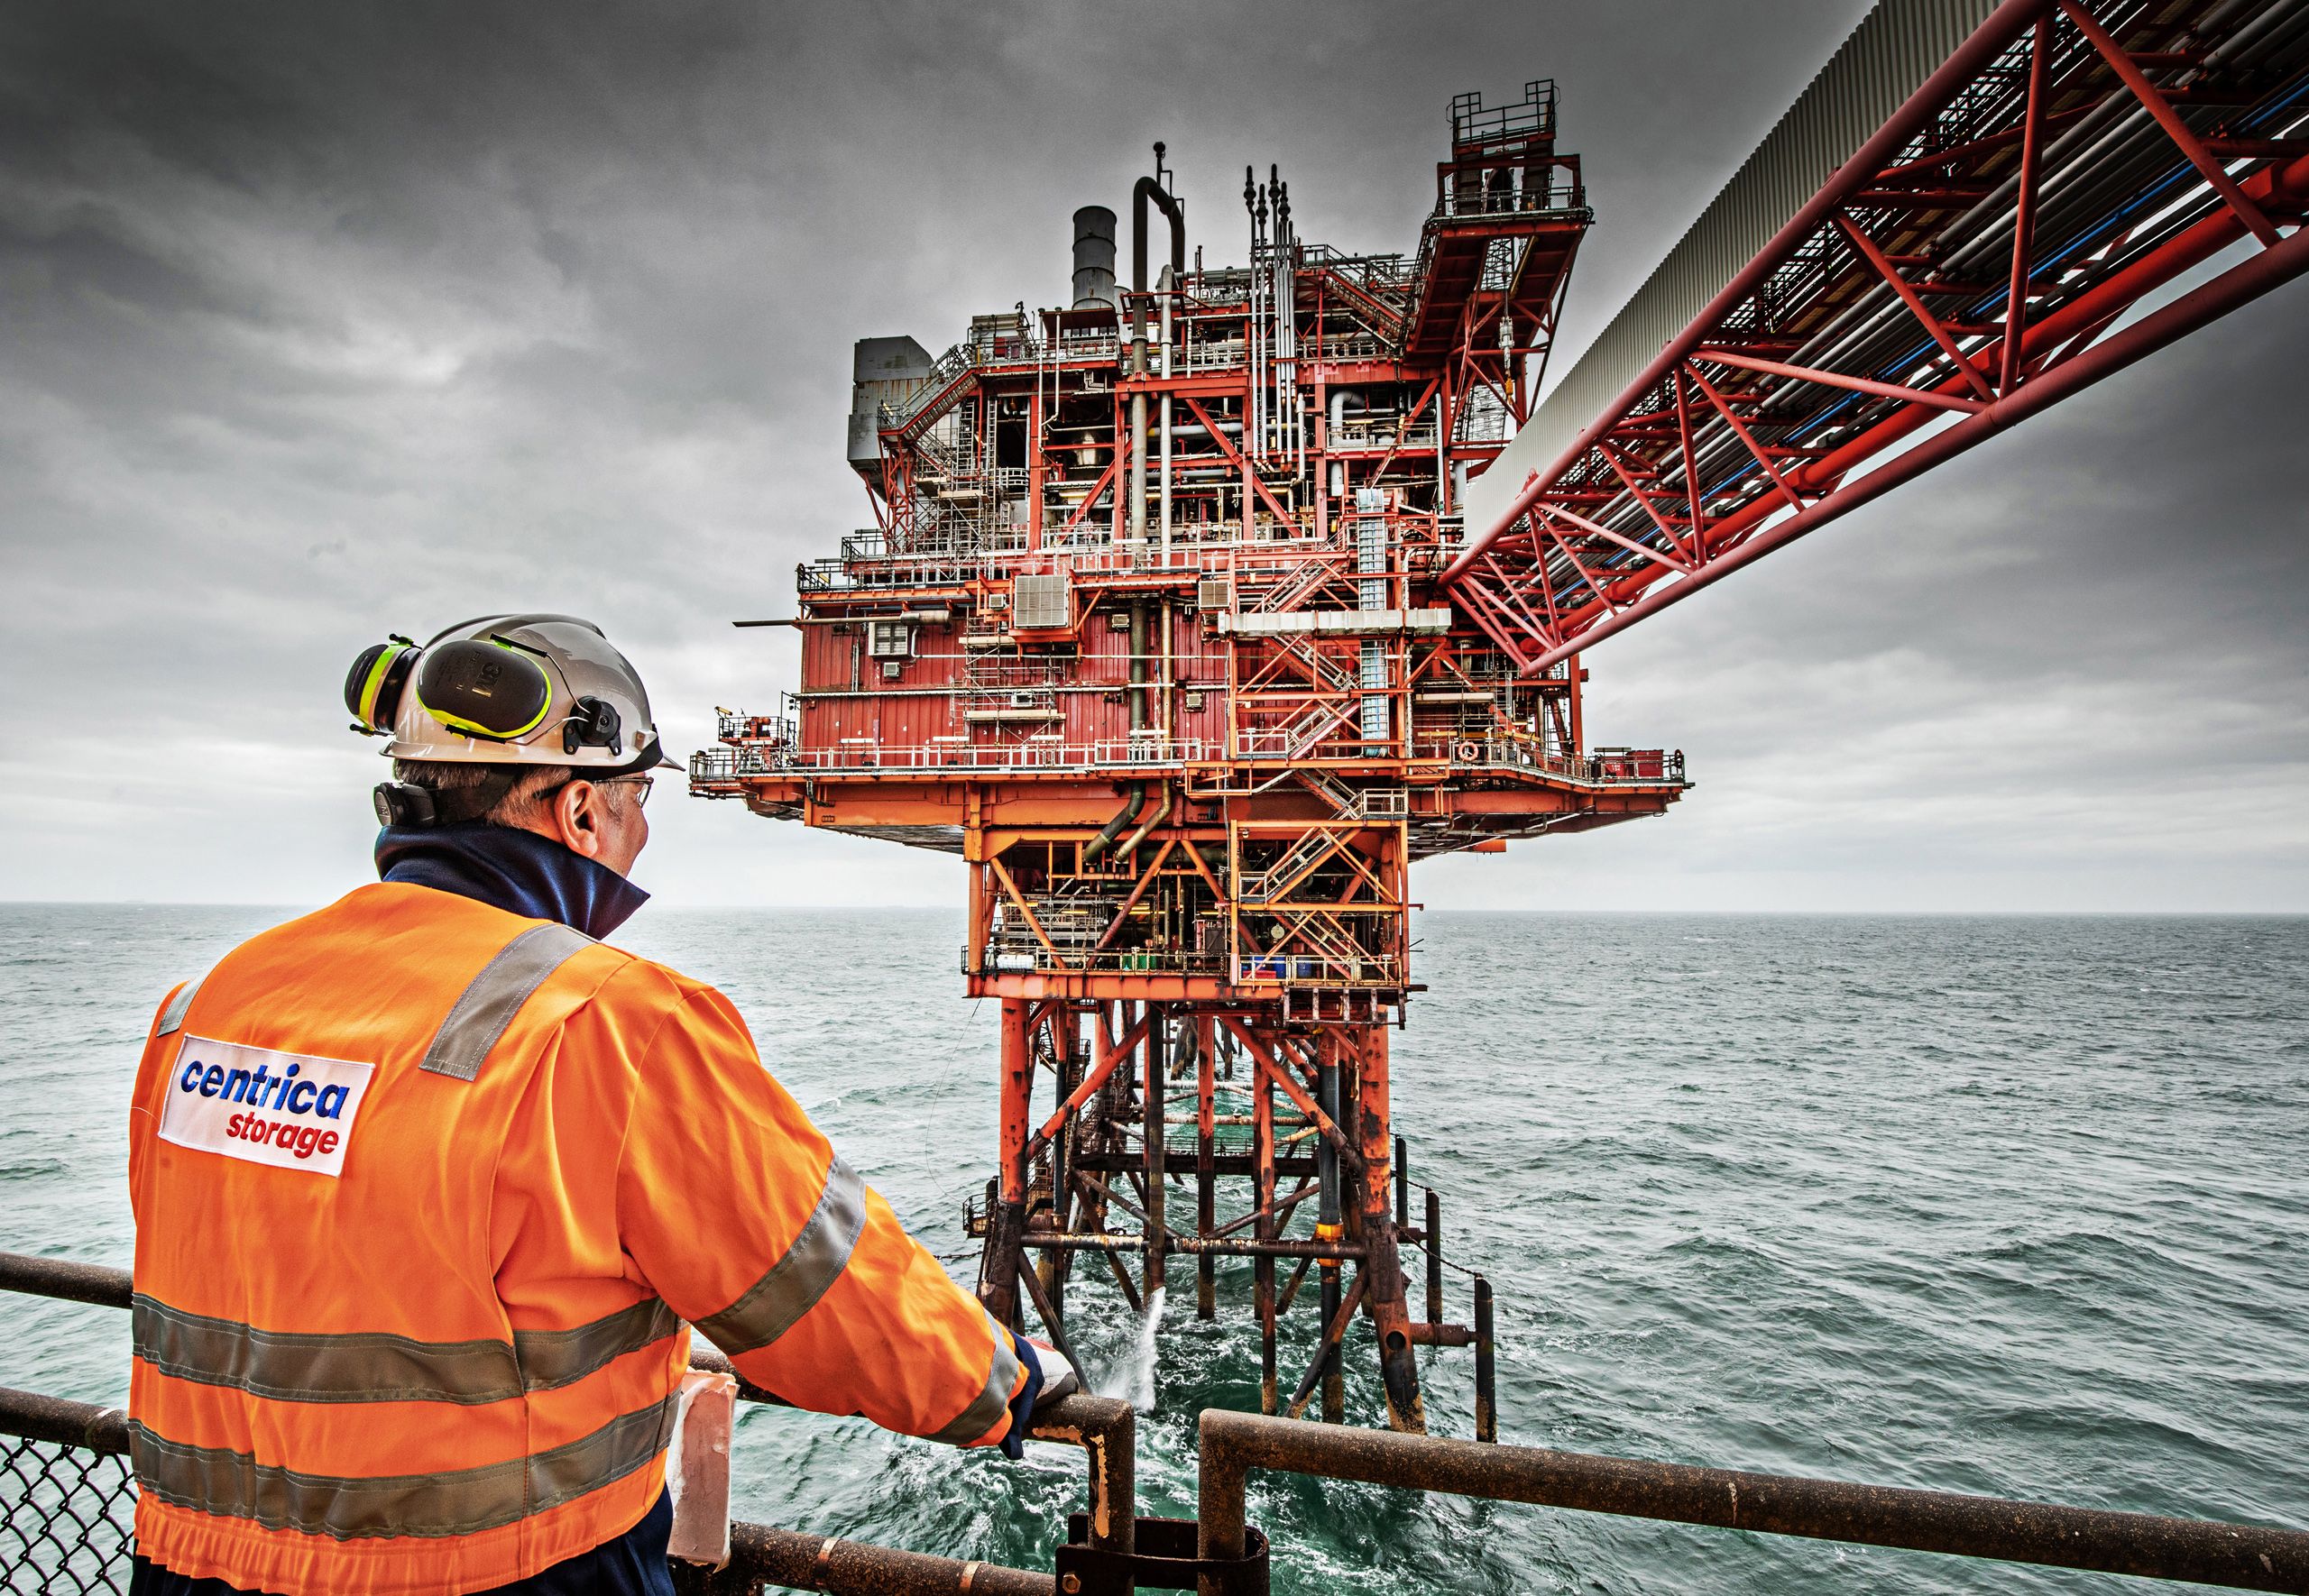 Offshore and energy photographer